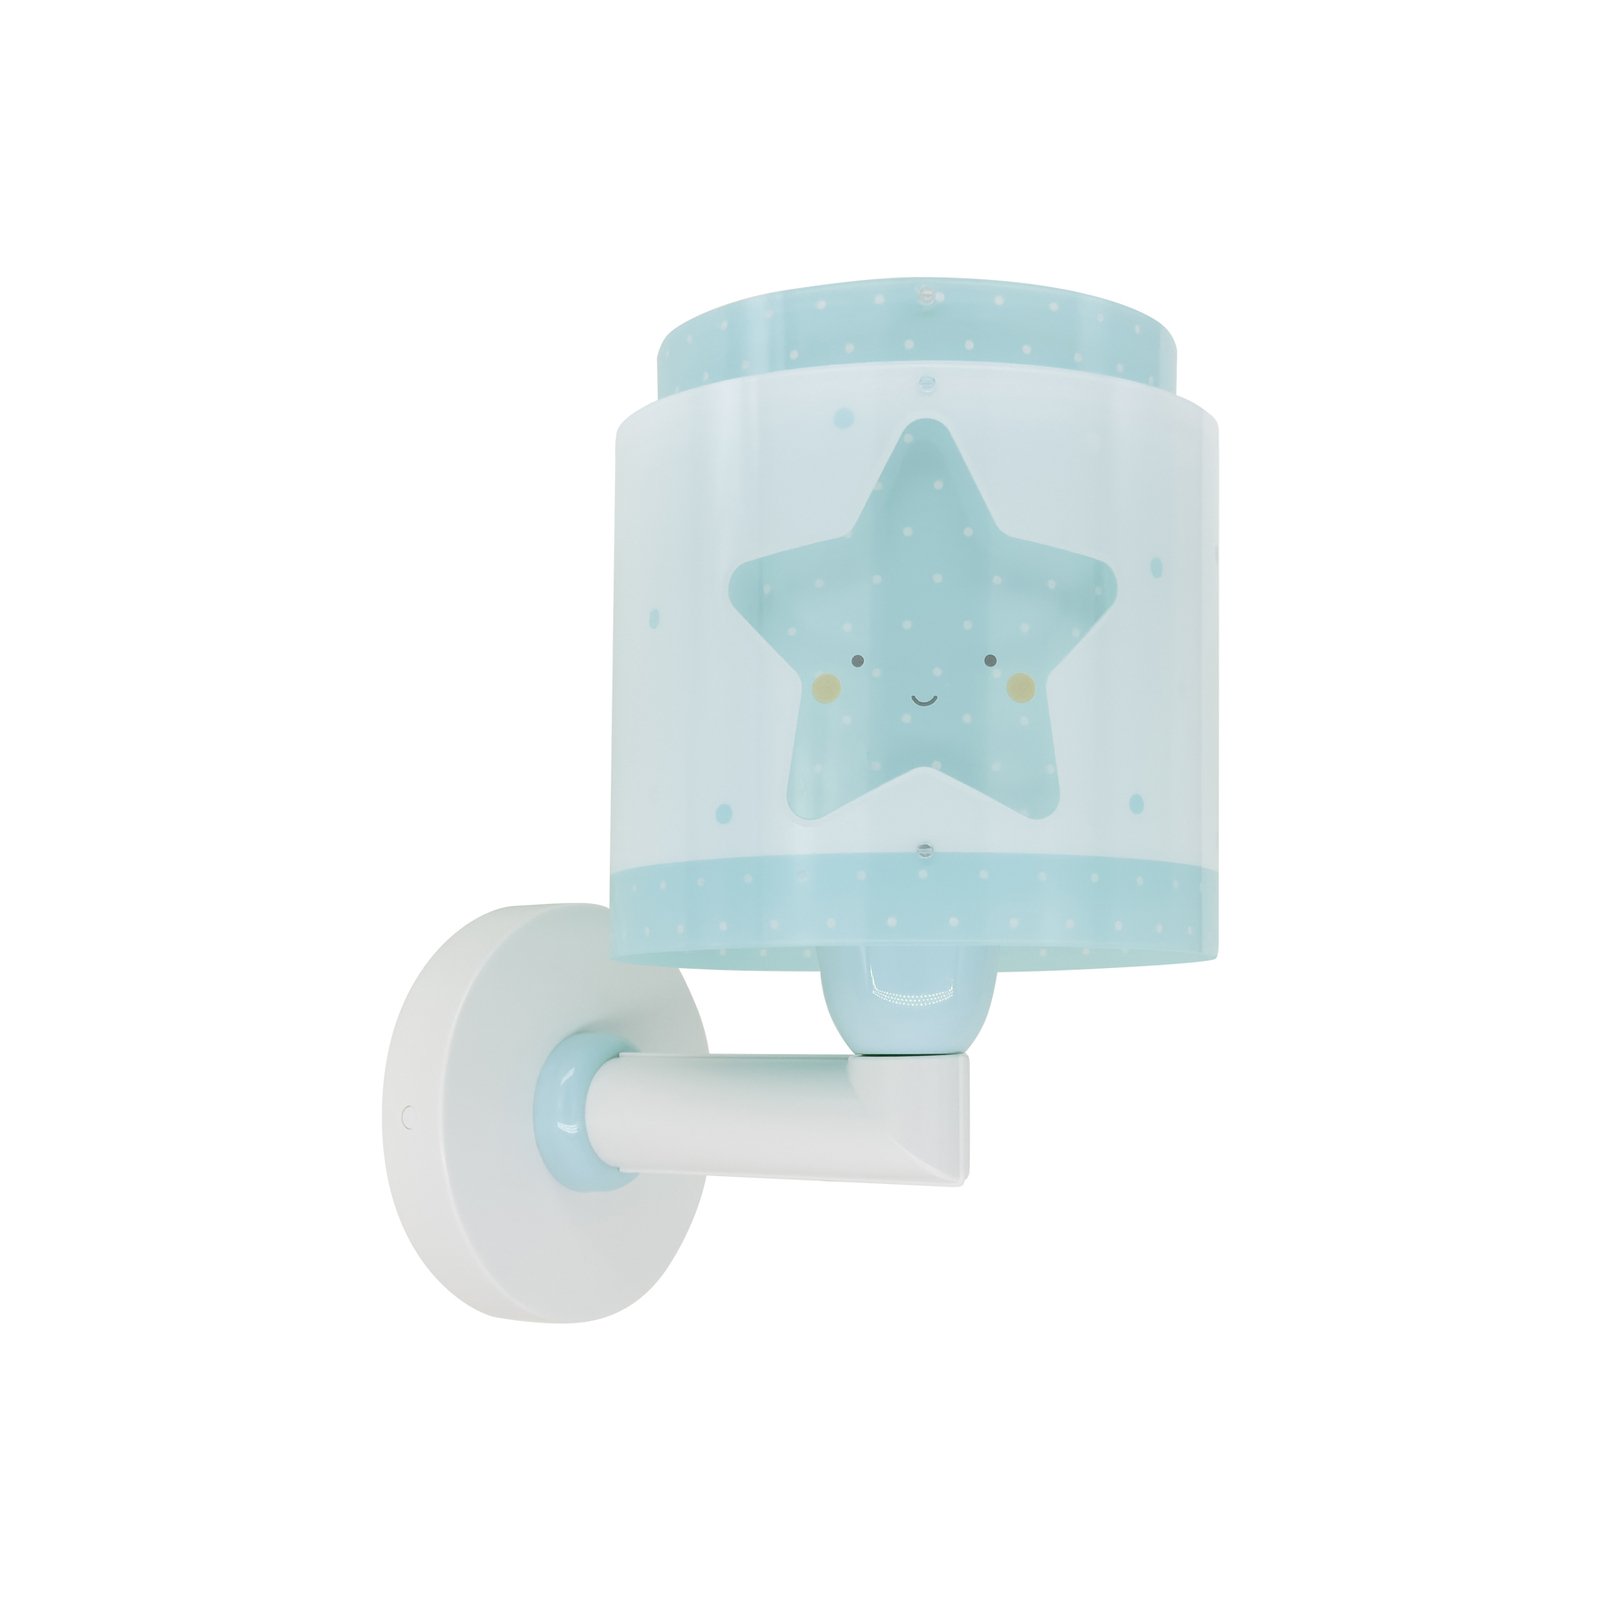 Dalber Baby Dreams wall light with a plug, blue